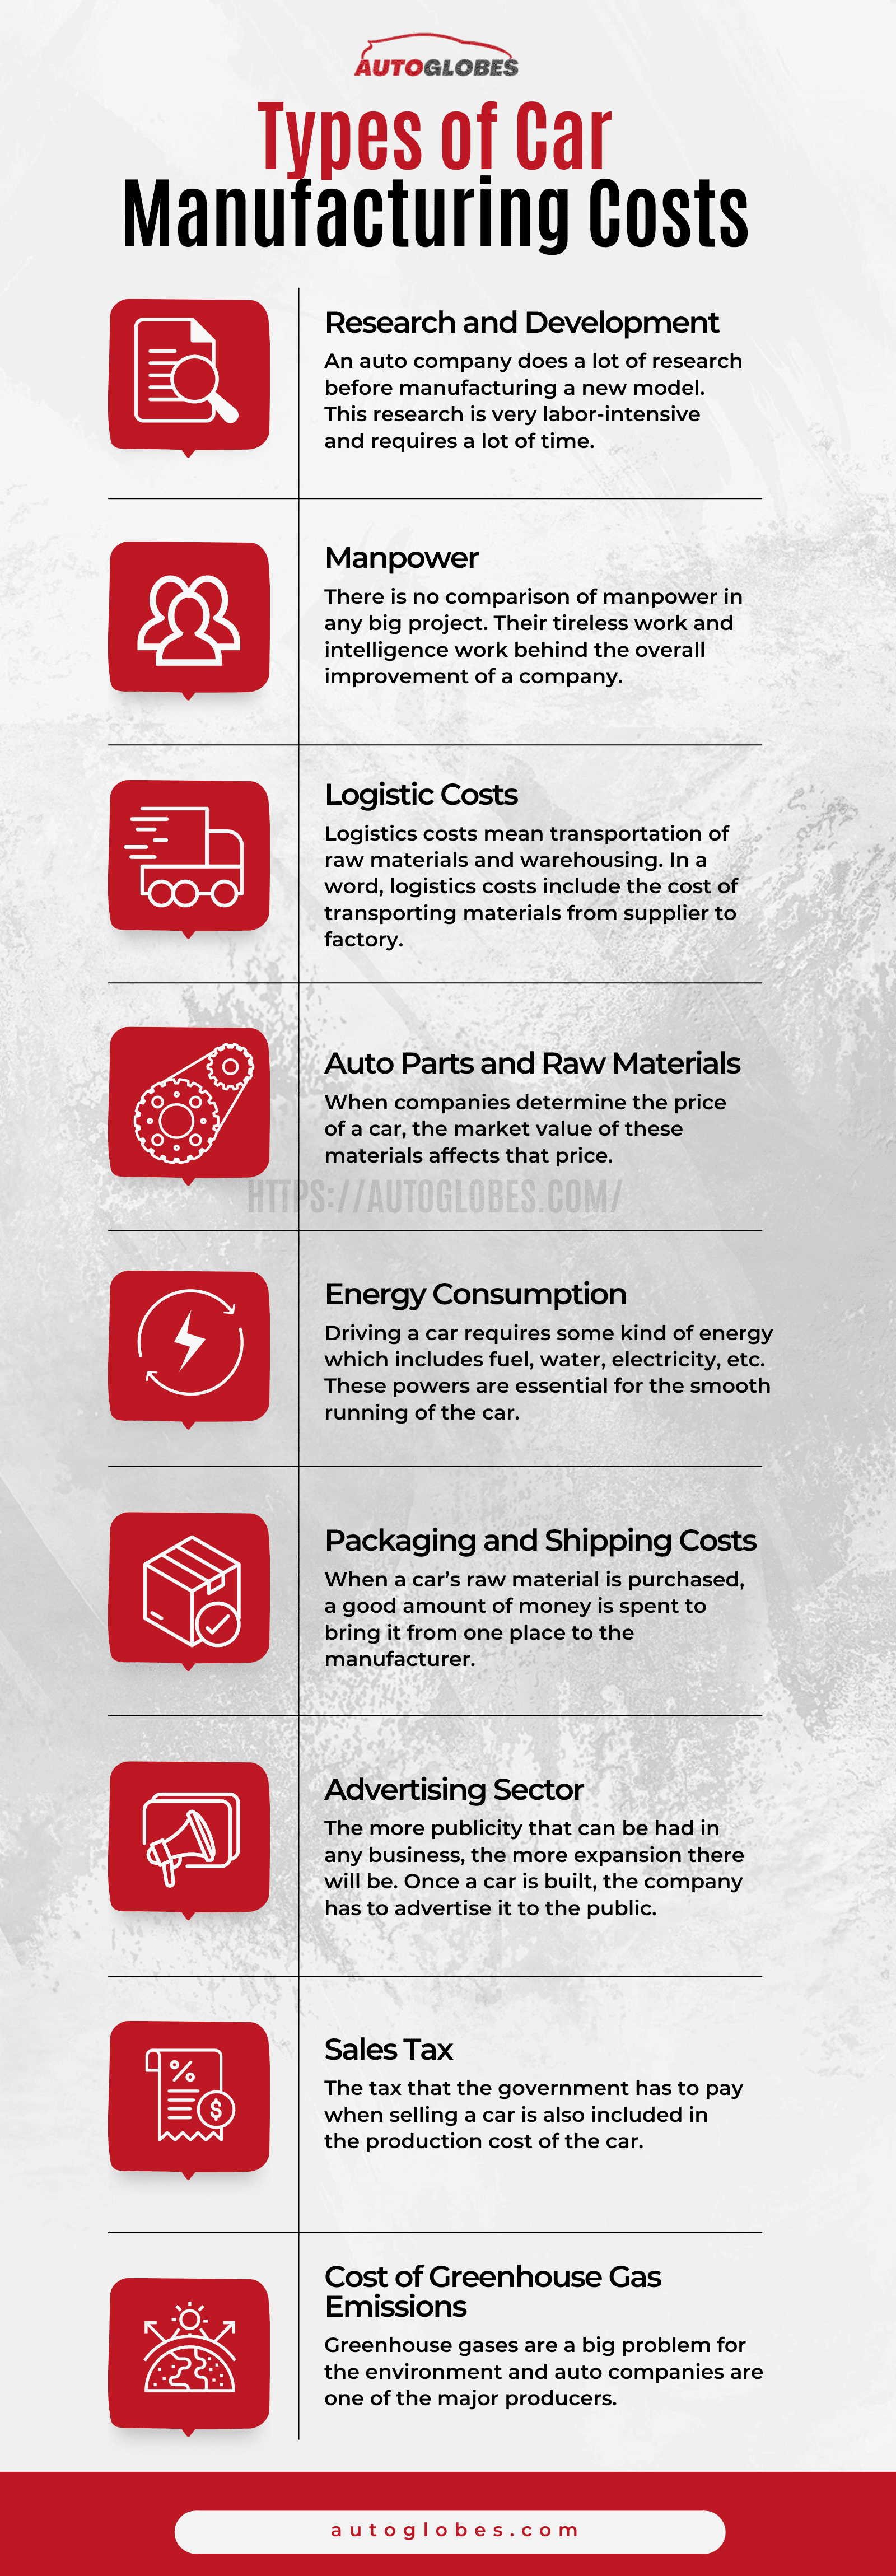 Types of Car Manufacturing Costs Infographic